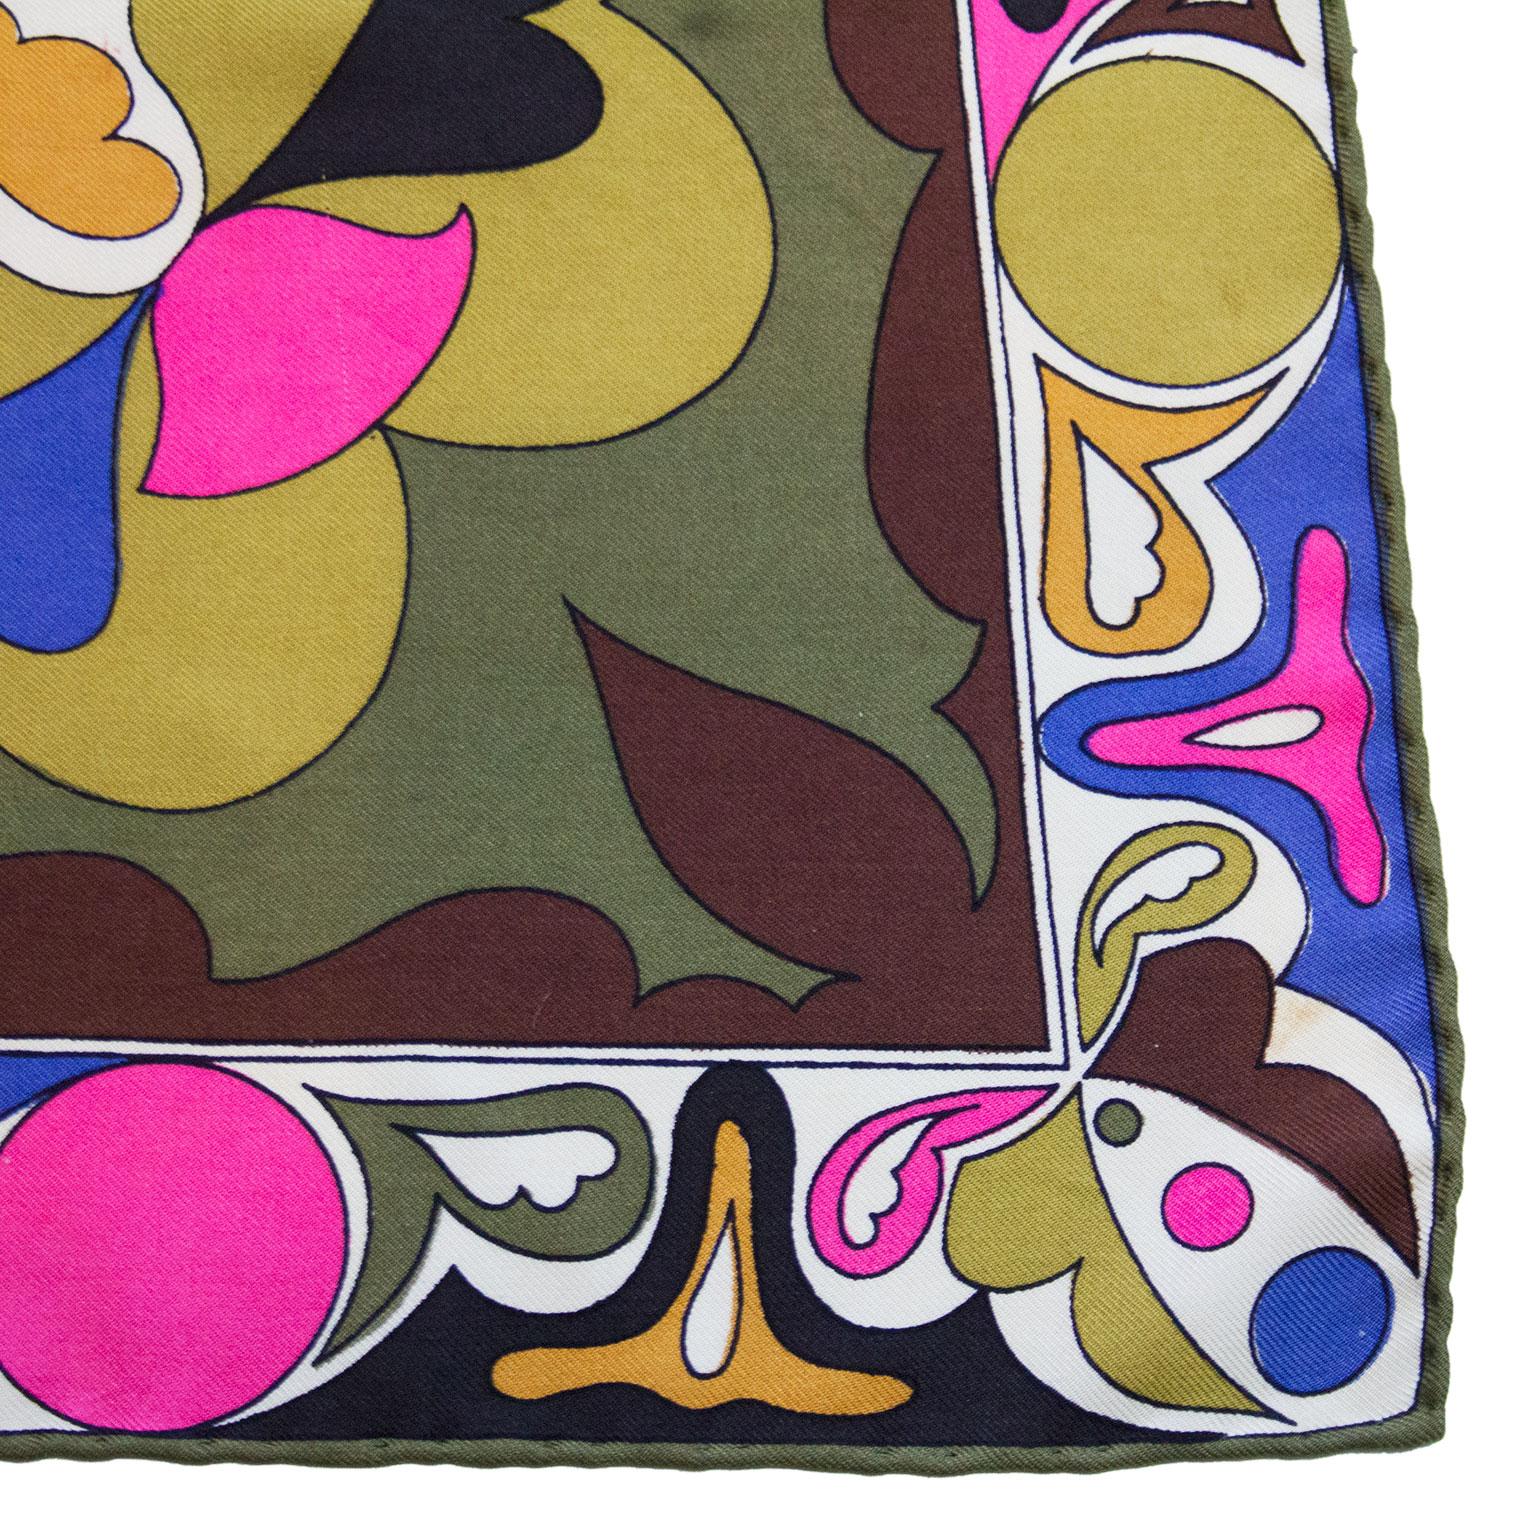 Women's or Men's Late 1990s Emilio Pucci Brown, Pink and Forest Green Printed Silk Scarf